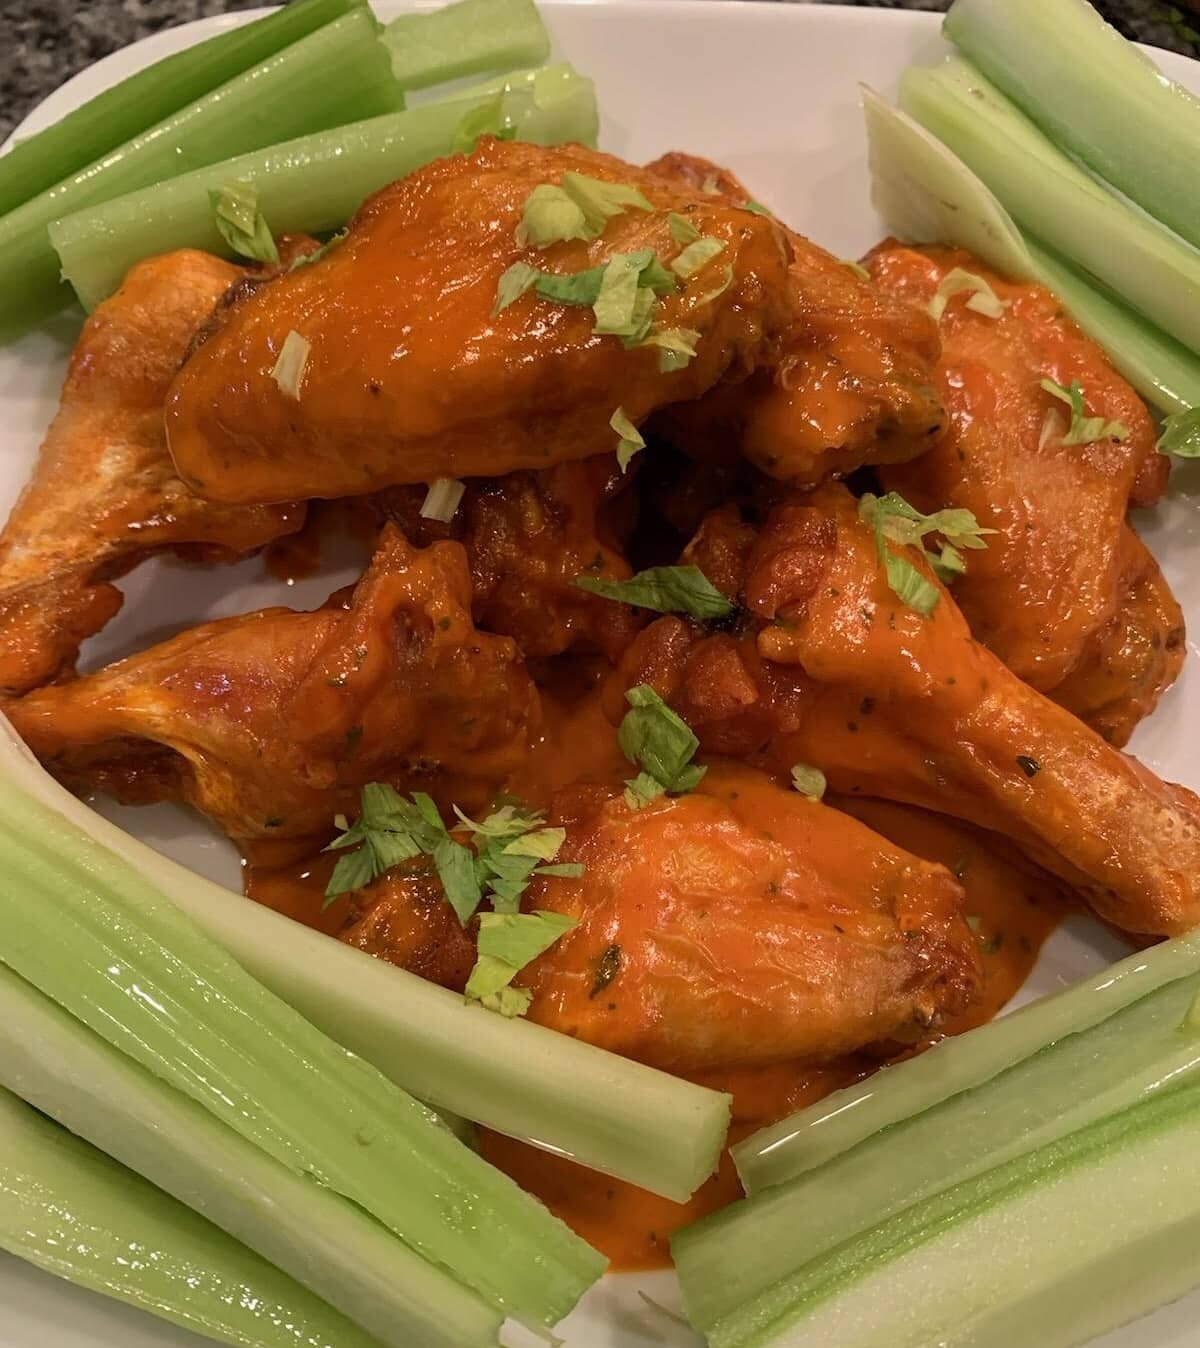 It's not #WingWednesday, but they're still delicious!! 😋🍗
.
.
.
#ChickenWings #DeepFryer #BBQChicken #Chicken #BBQWings #SpicyWings #BBQAndBeer #PoolsideBBQ #GrillinAndChillin #Youtuber #YouTubeChannel #Barbeque #BBQFamily #Foodie #GrillingSeason #